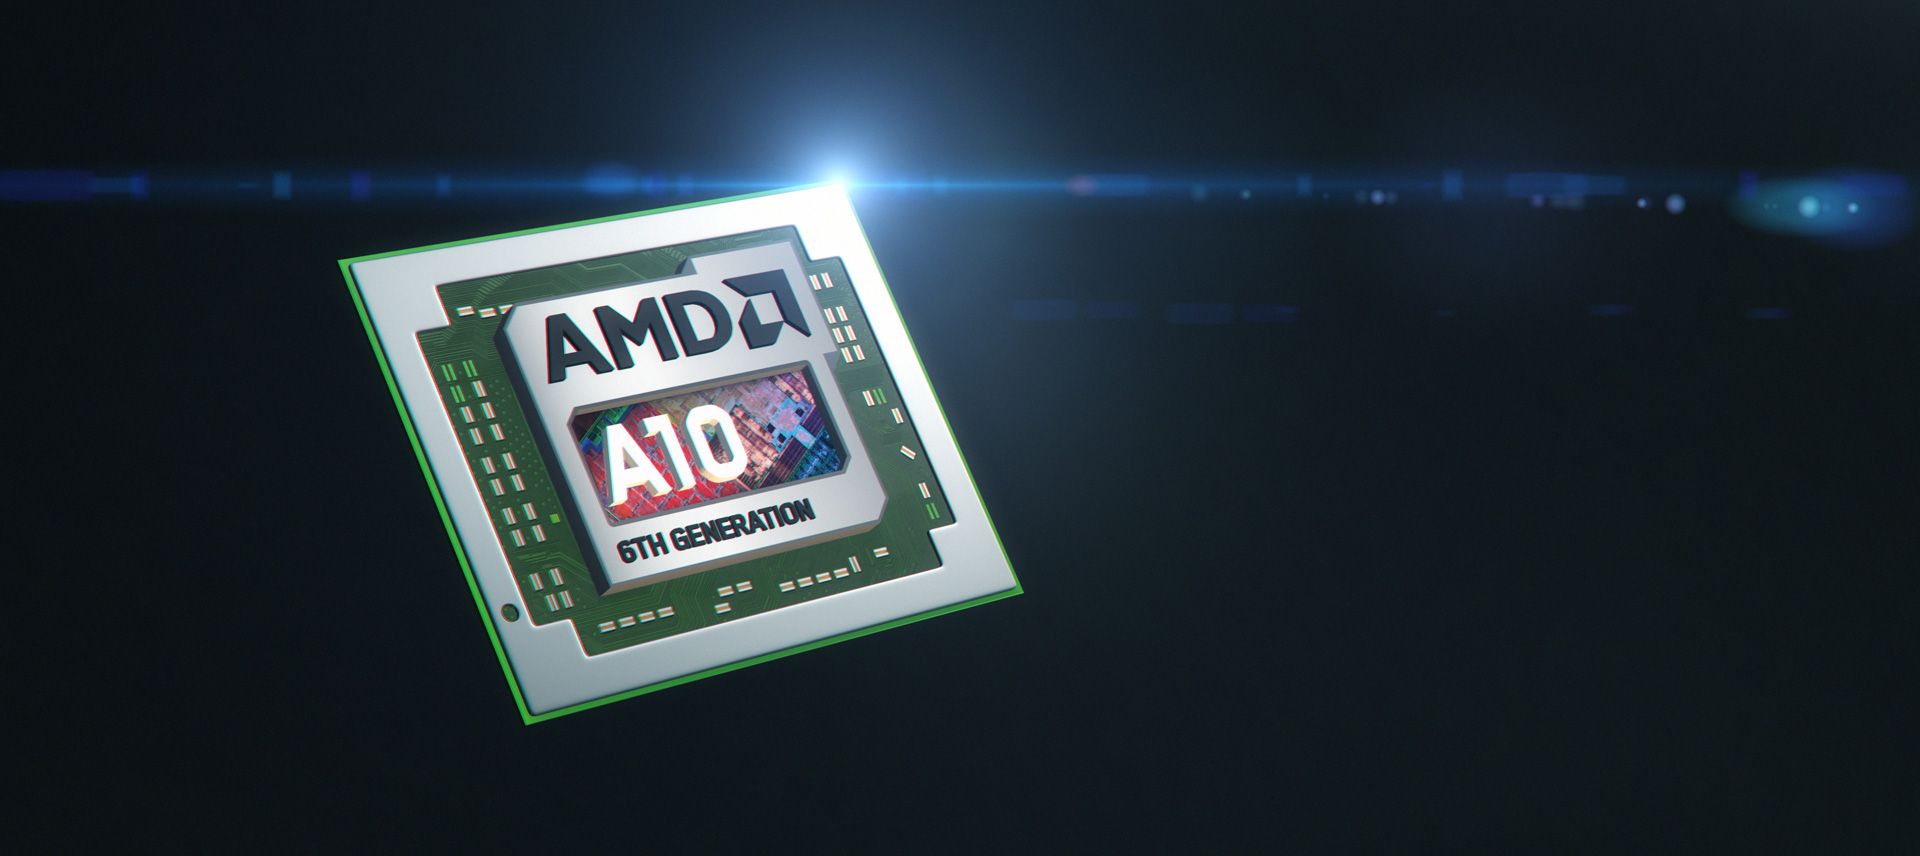 1920x856 Amd Officially Launches 7000 Series Godavari Apus A10 7850k Flagship With Freesync Dx12 Hsa And Opencl 2 0 For 127